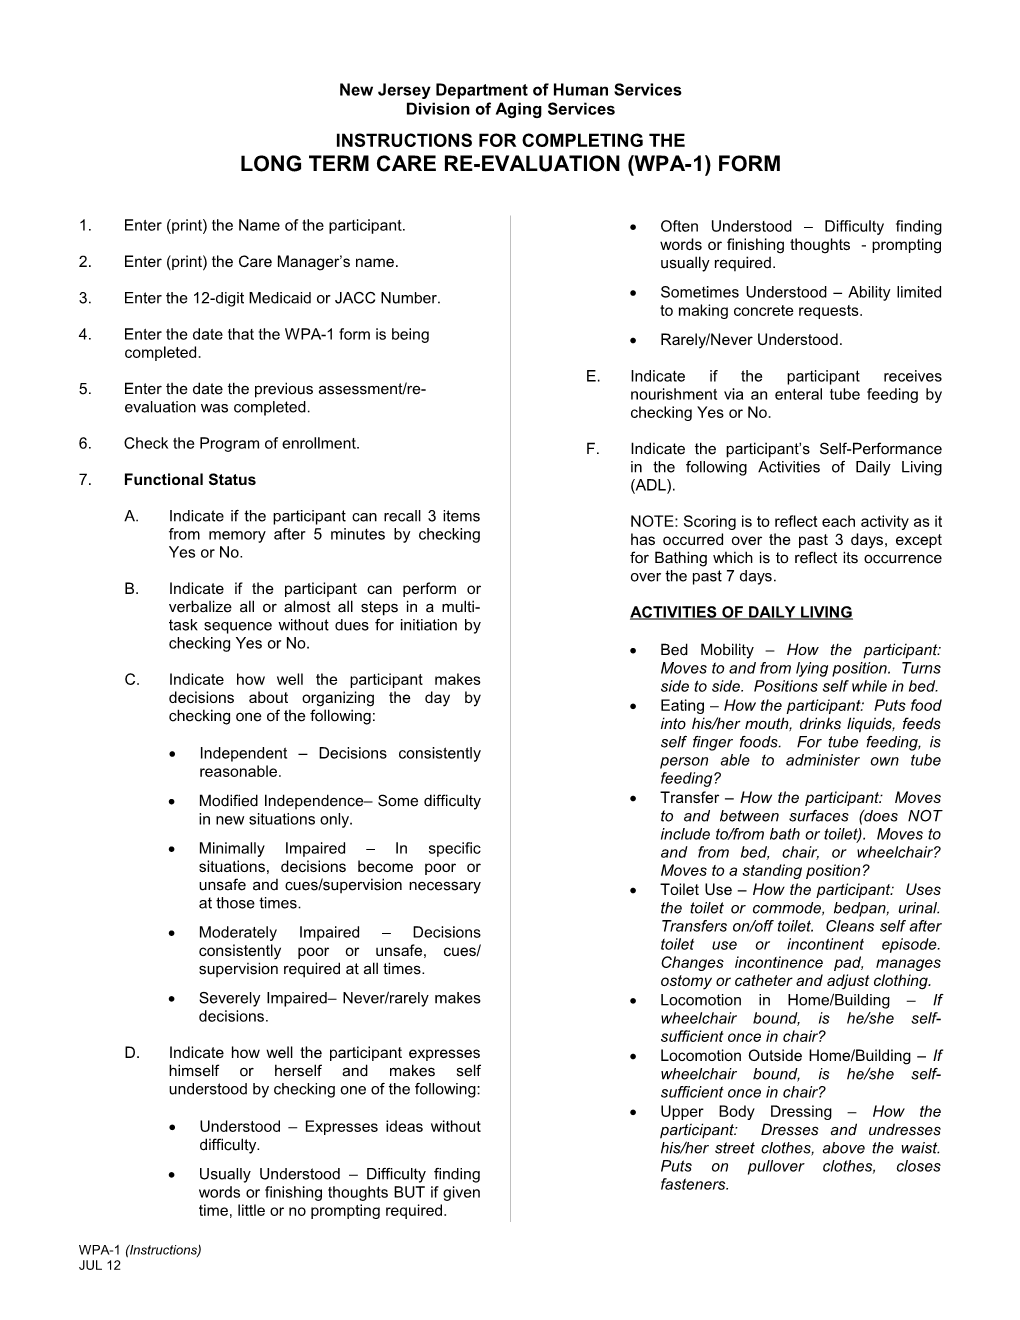 Instructions for Completing the Long Term Care Re-Evaluation (WPA-1) Form